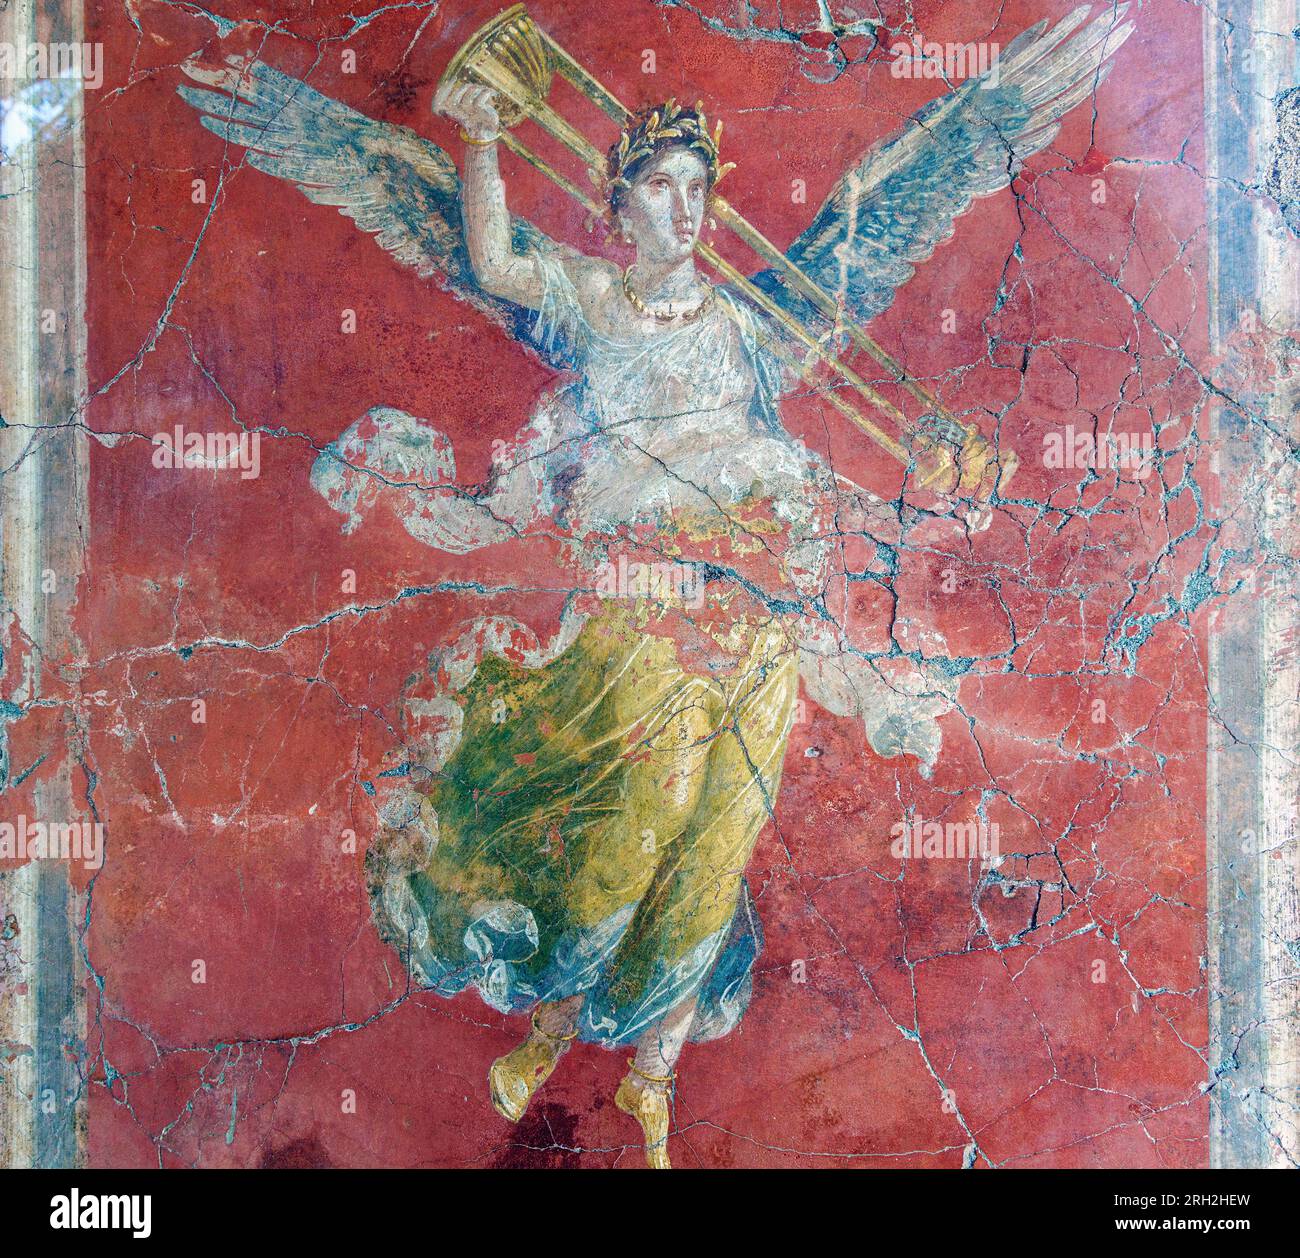 Pompeii Archaeological Site, Campania, Italy.  Winged Victory fresco on display in the Large Palaestra, or Palestra Grande.  Pompeii, Herculaneum, and Stock Photo